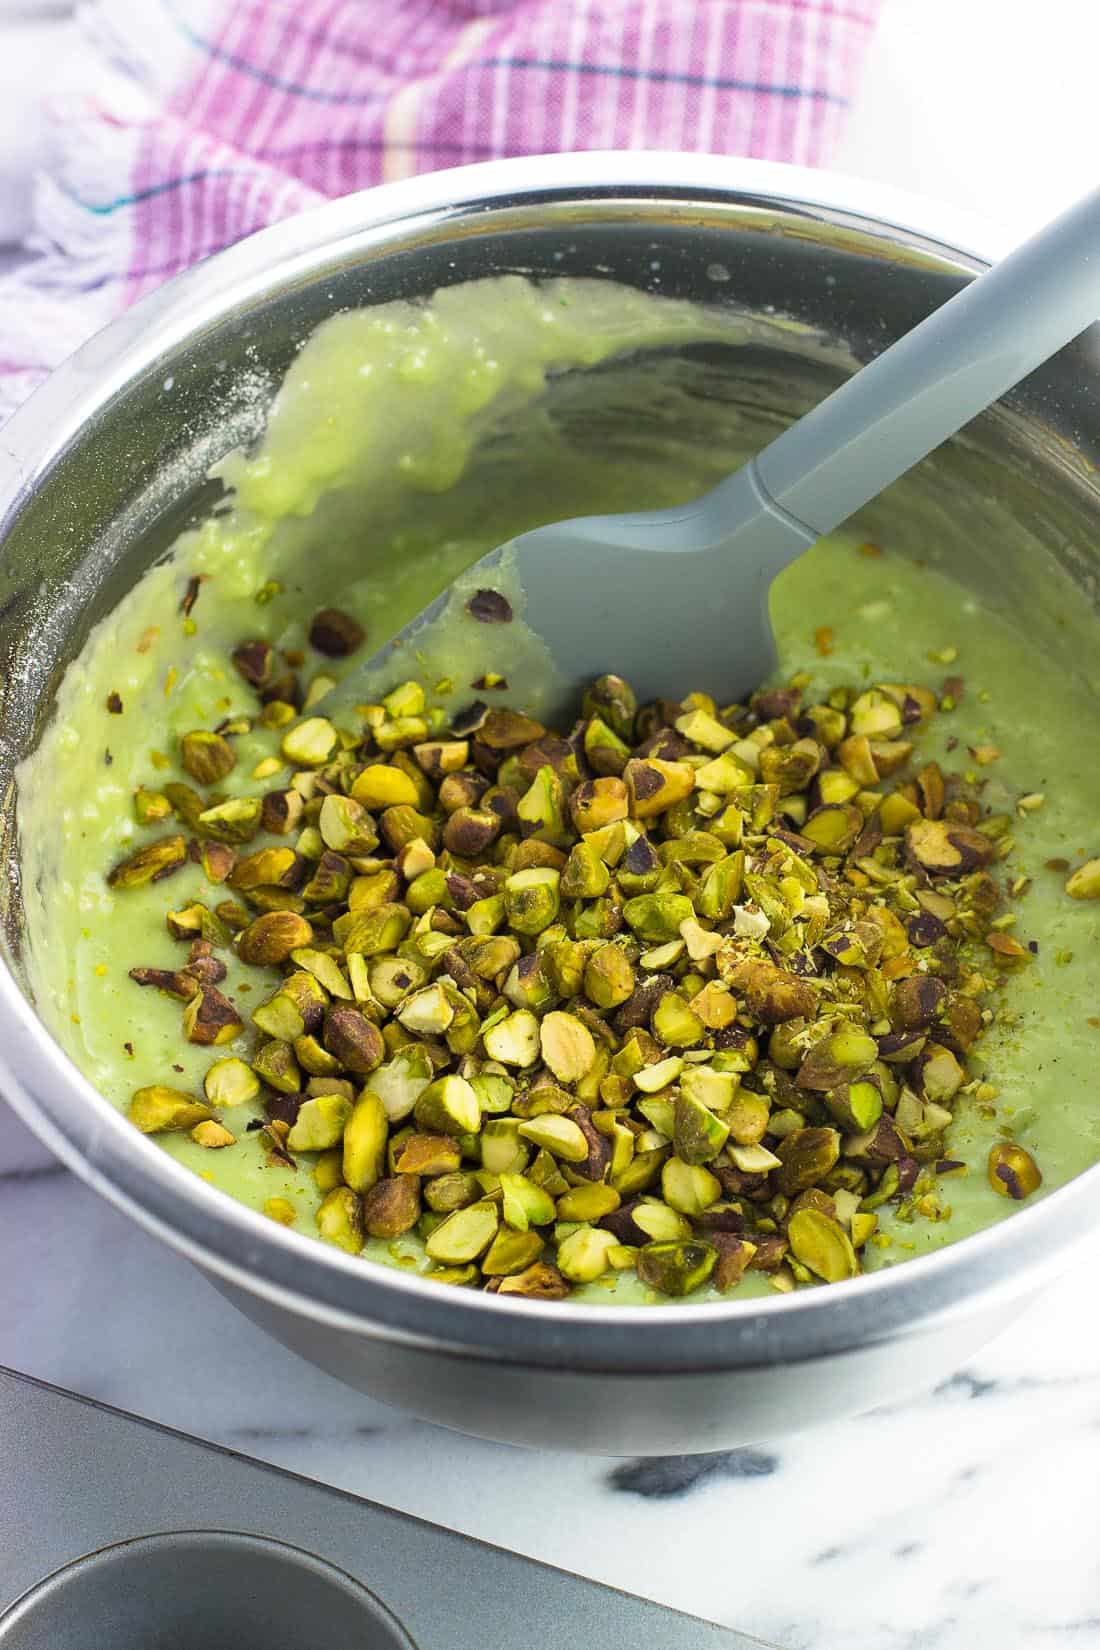 Pistachio muffin batter in a metal mixing bowl with chopped pistachios ready to be stirred in